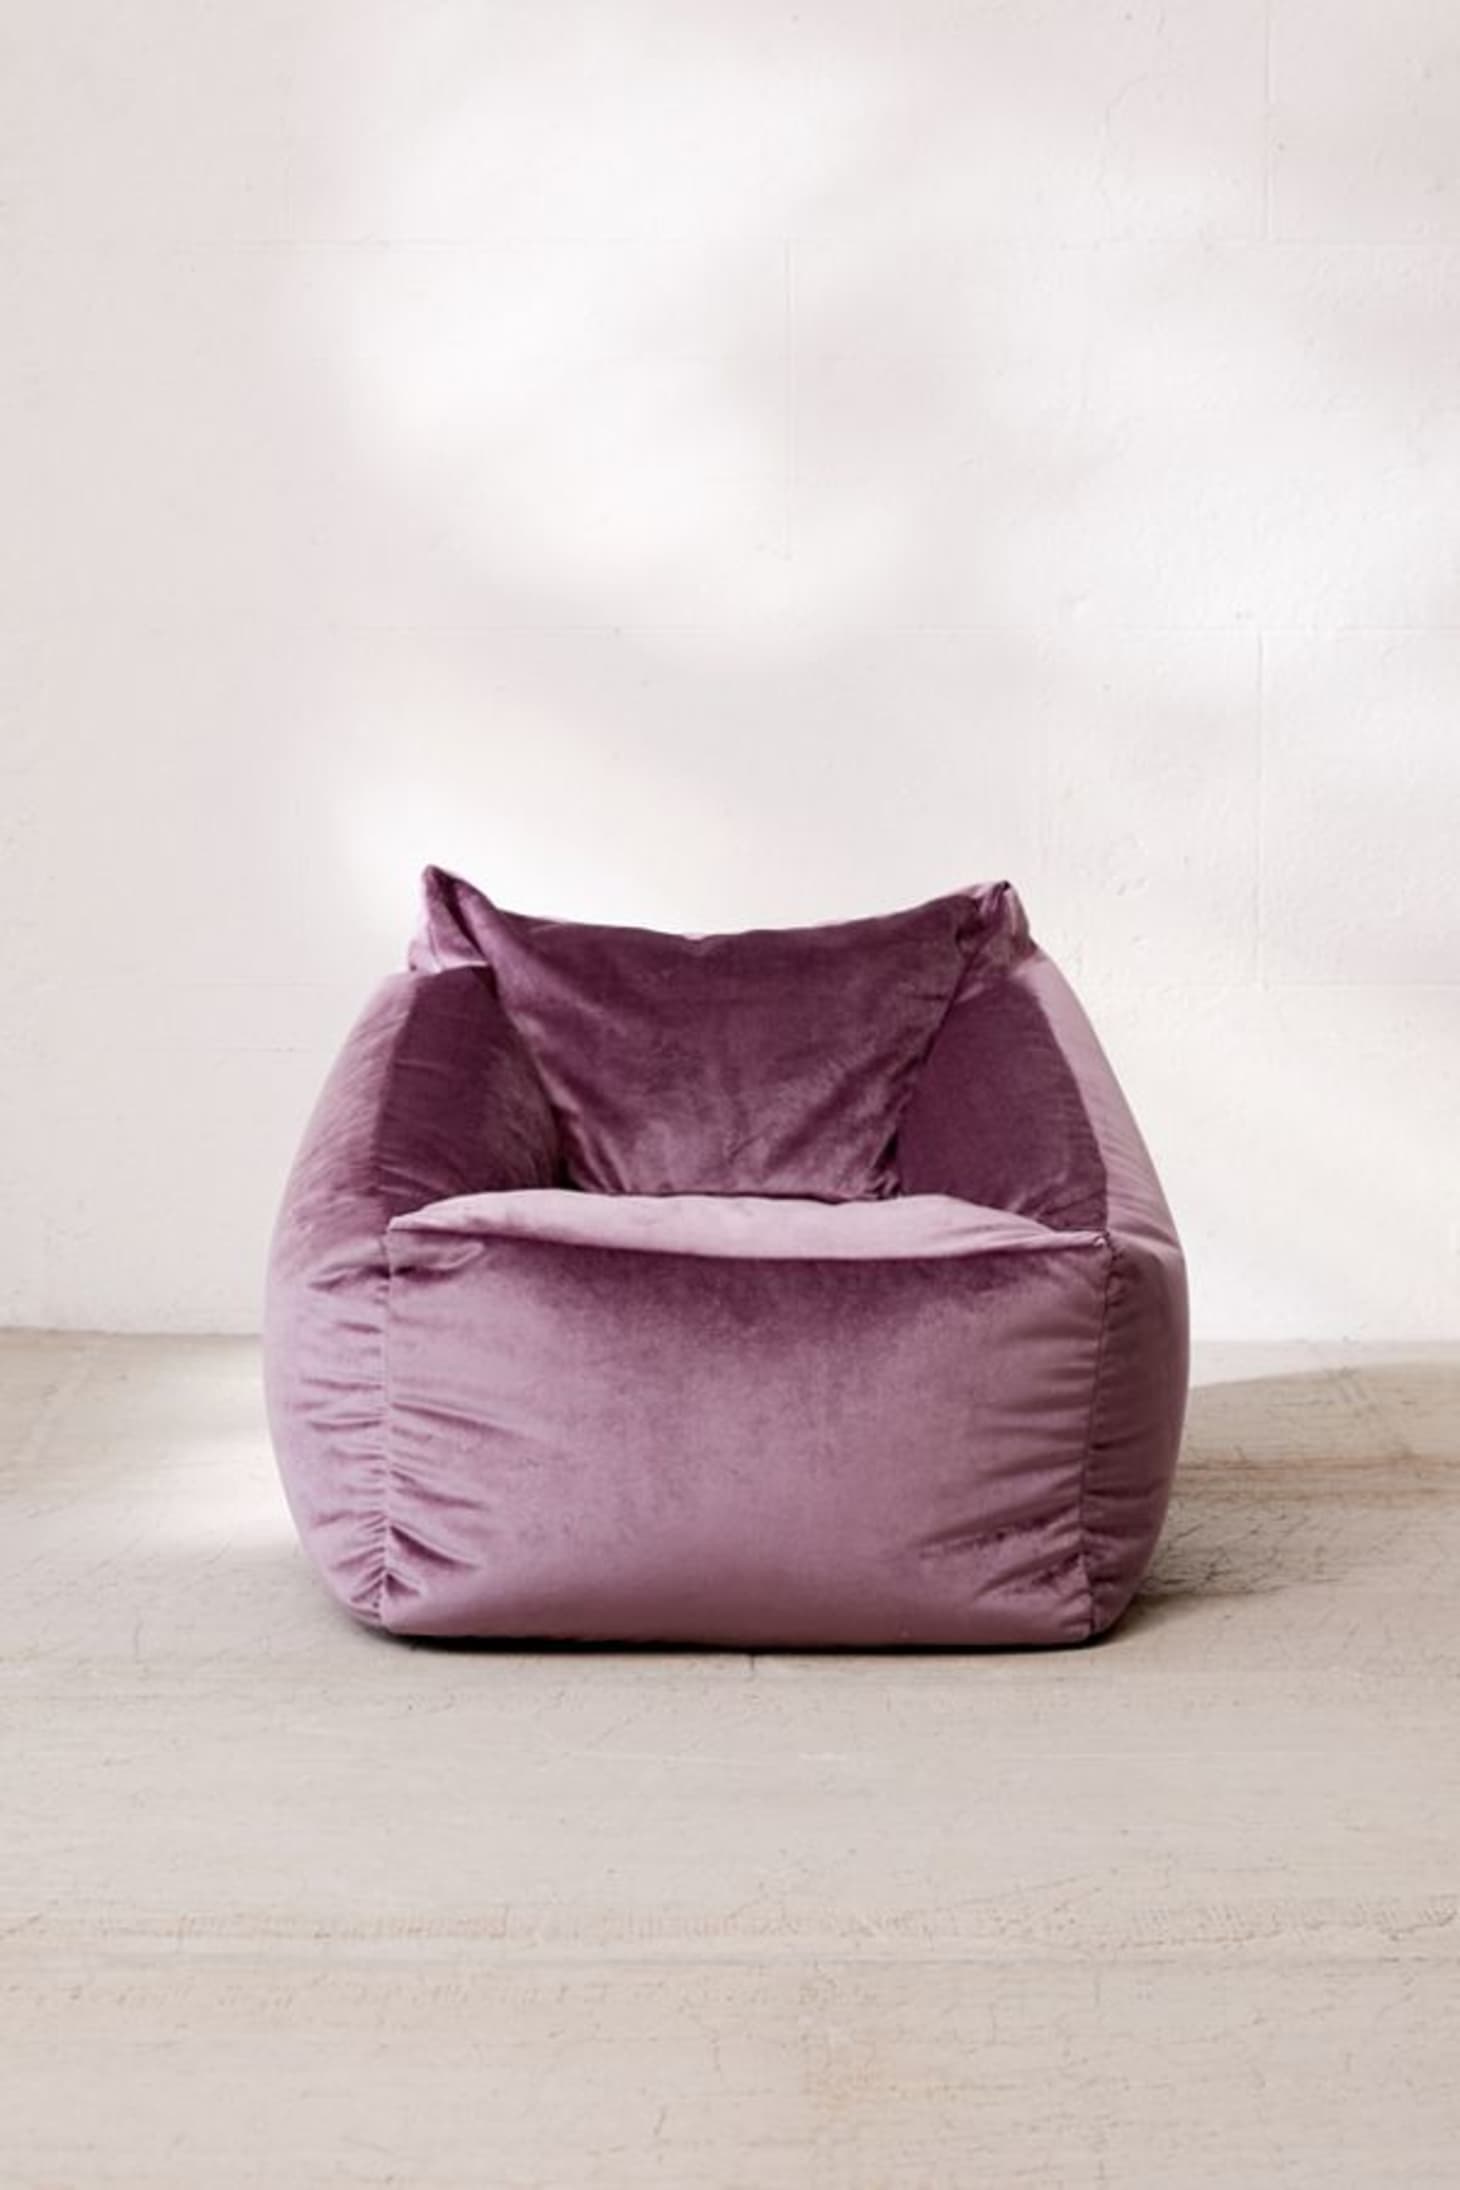 Floor Seating Ideas Cushions Poufs And Pillows Apartment Therapy